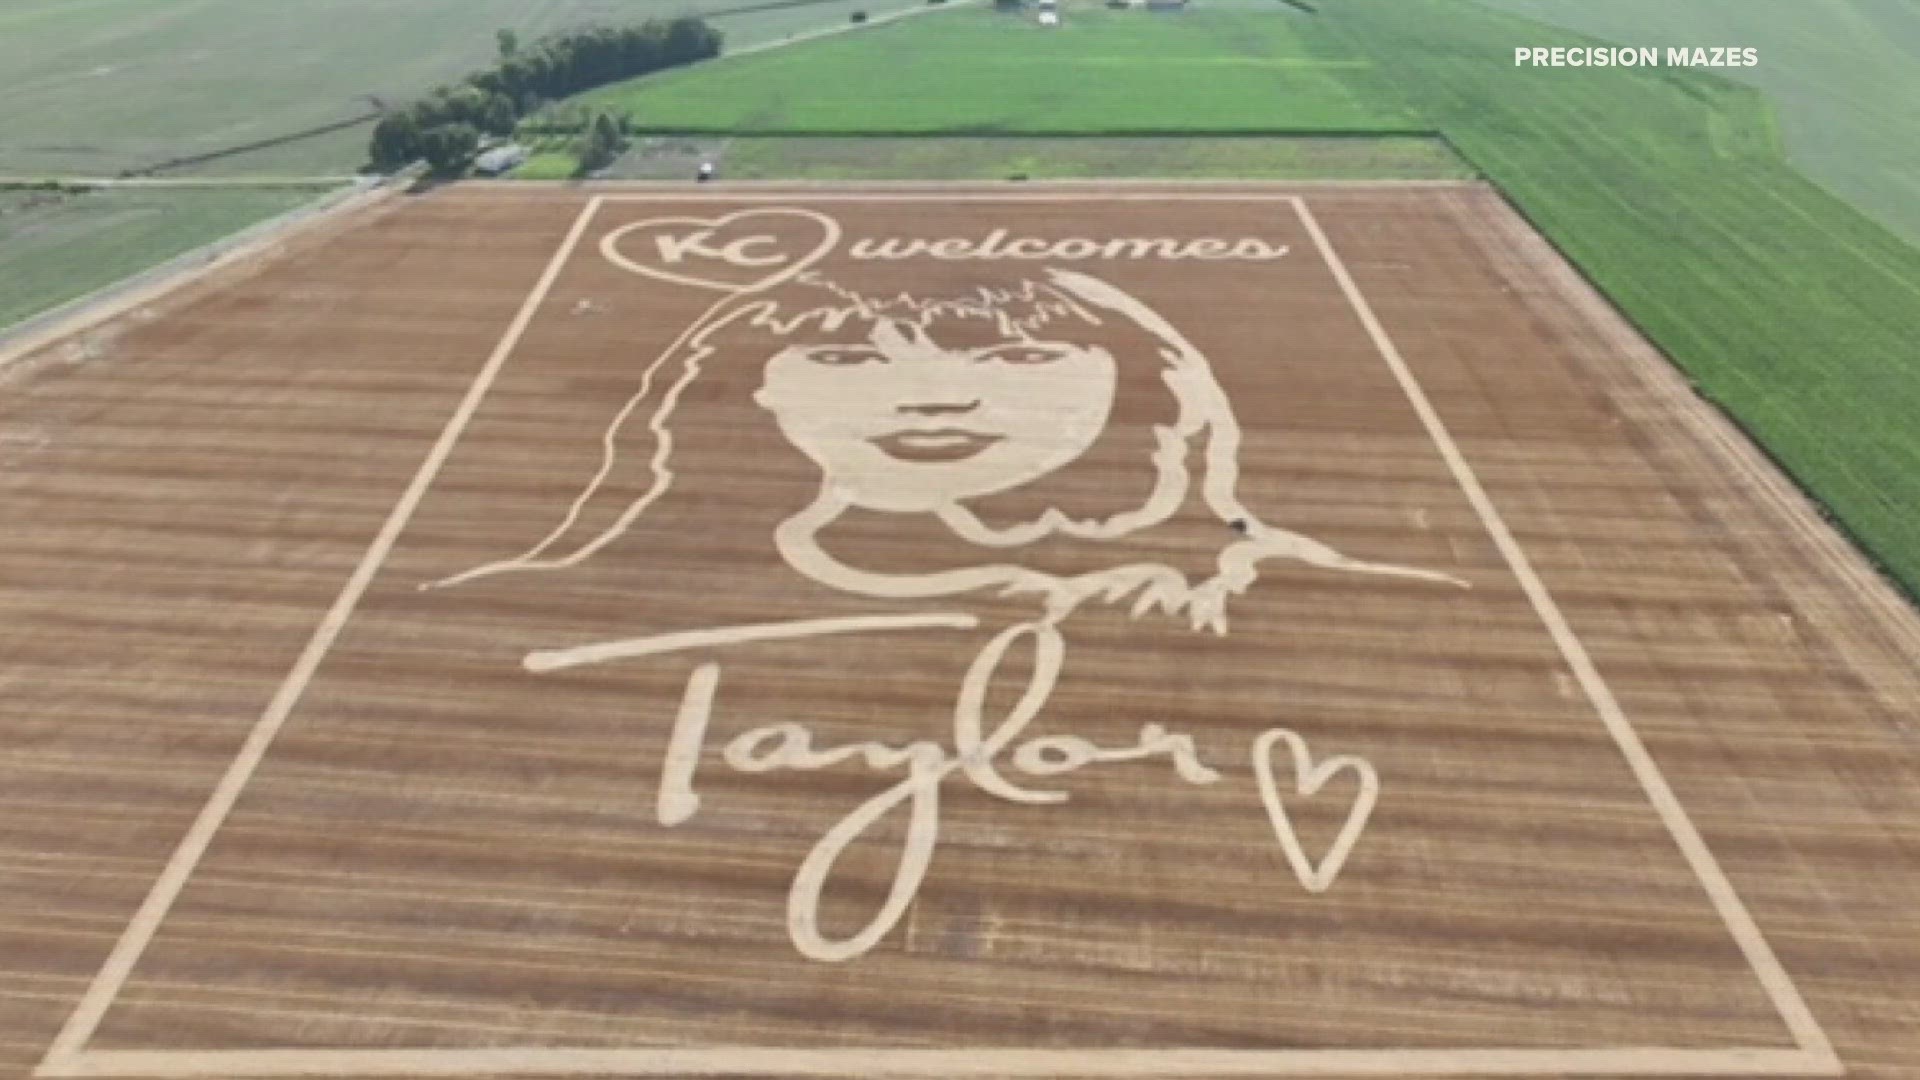 A large piece of crop art was created in Taylor Swift's likeness. She will perform this weekend at Kansas City's Arrowhead Stadium.